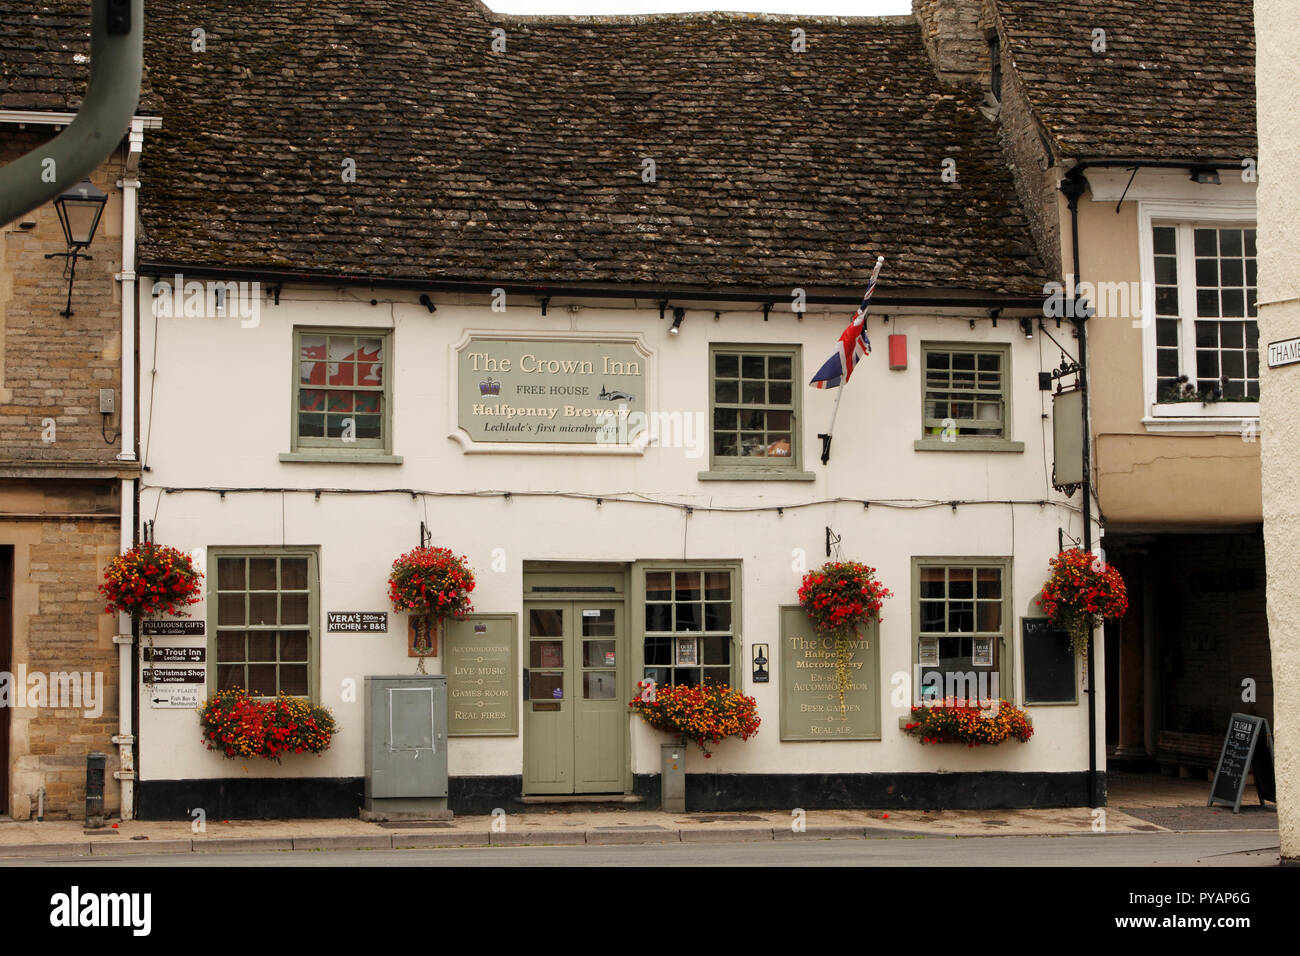 Lechlade. Crown Inn, Micro brewery. Halfpenny brewery. Stock Photo